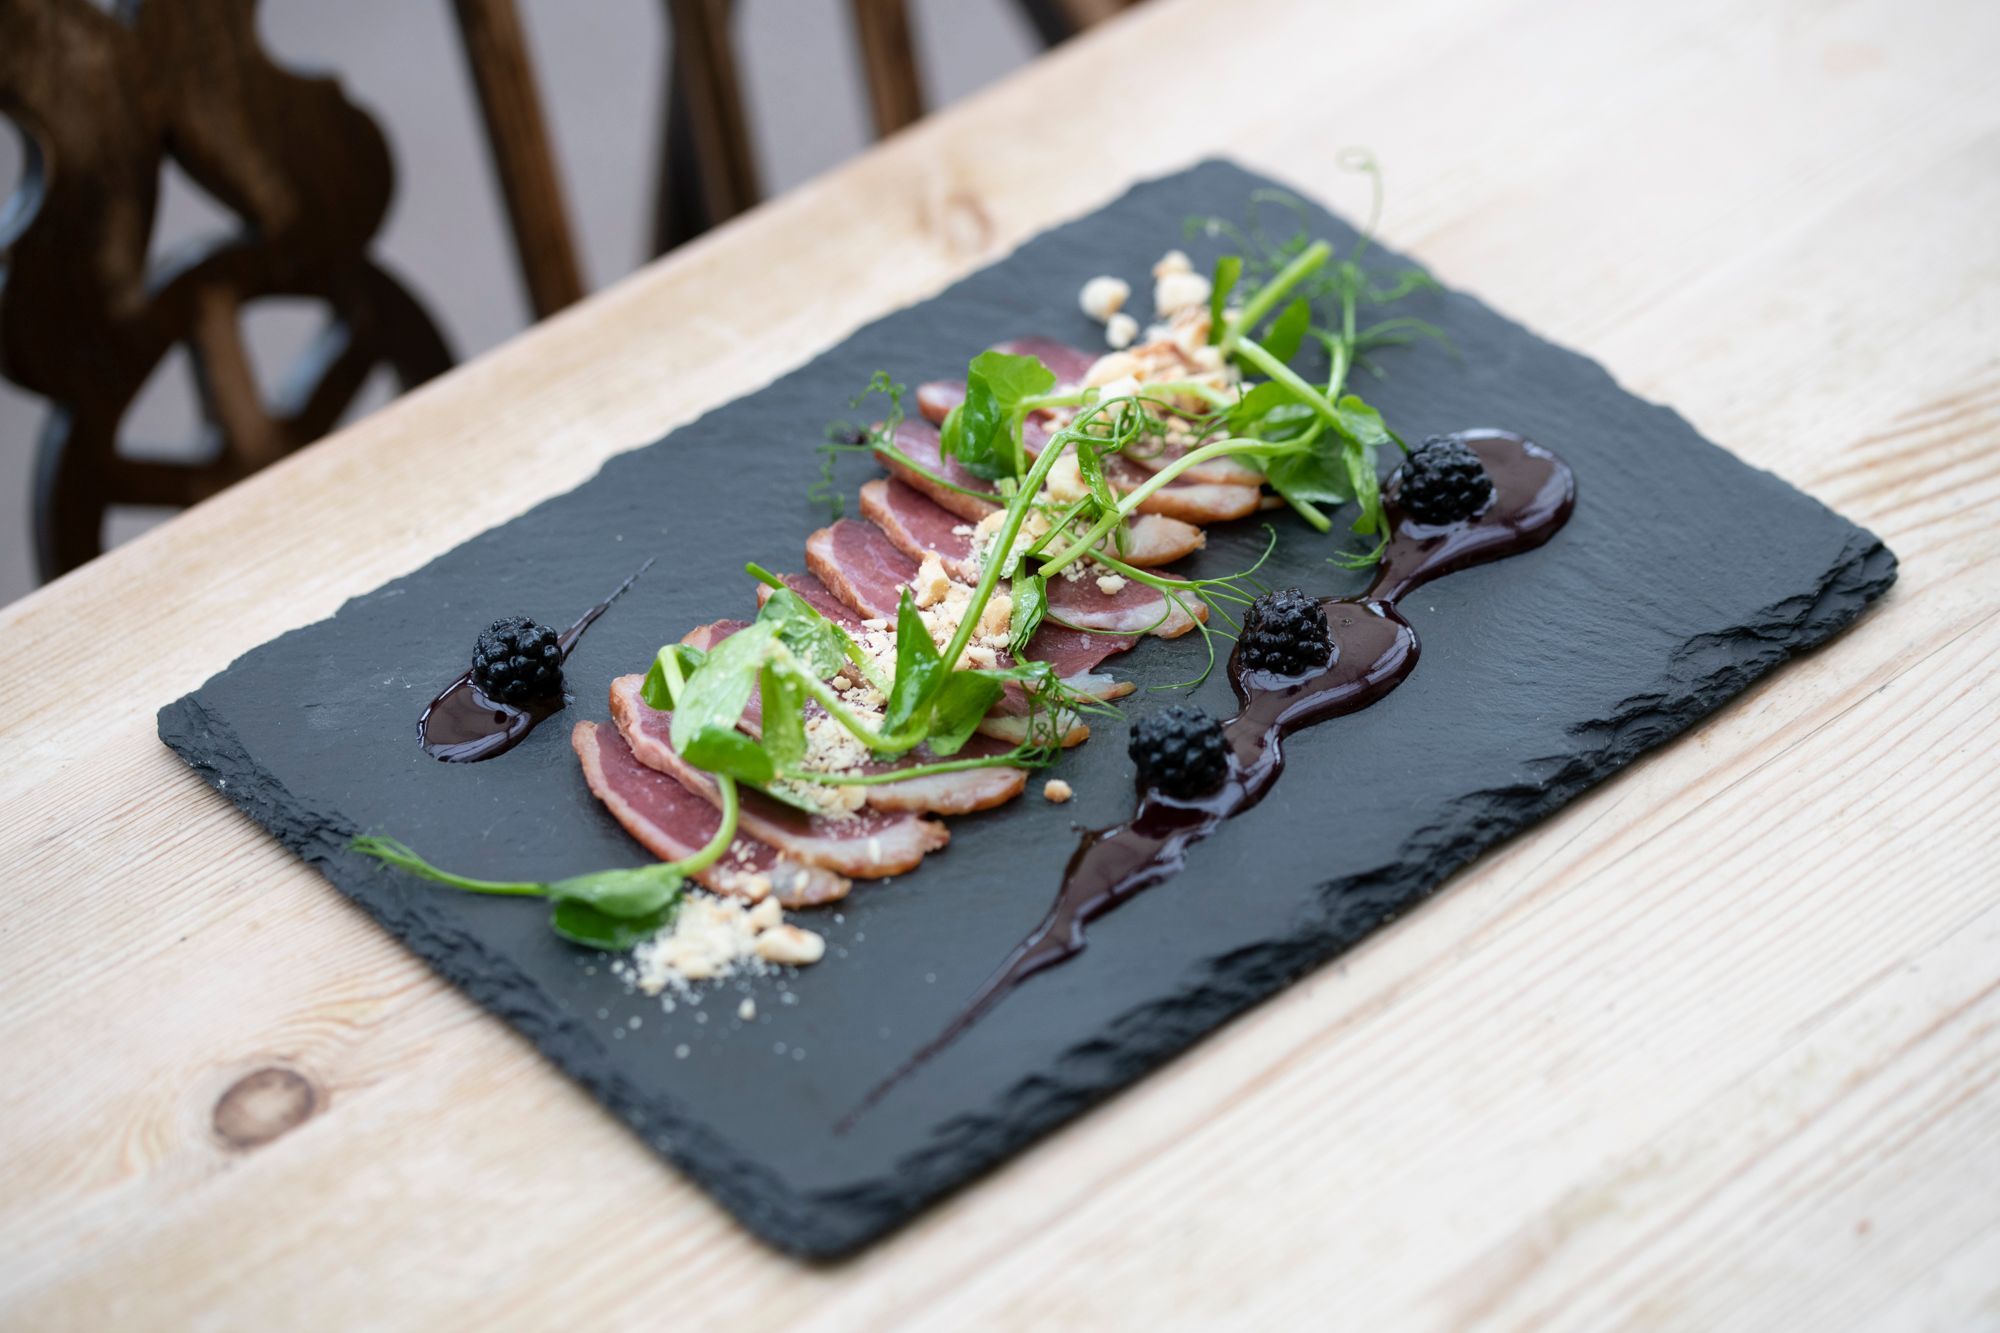 Local smoked duck breast, local blackberries, toasted hazelnuts, pea shoots